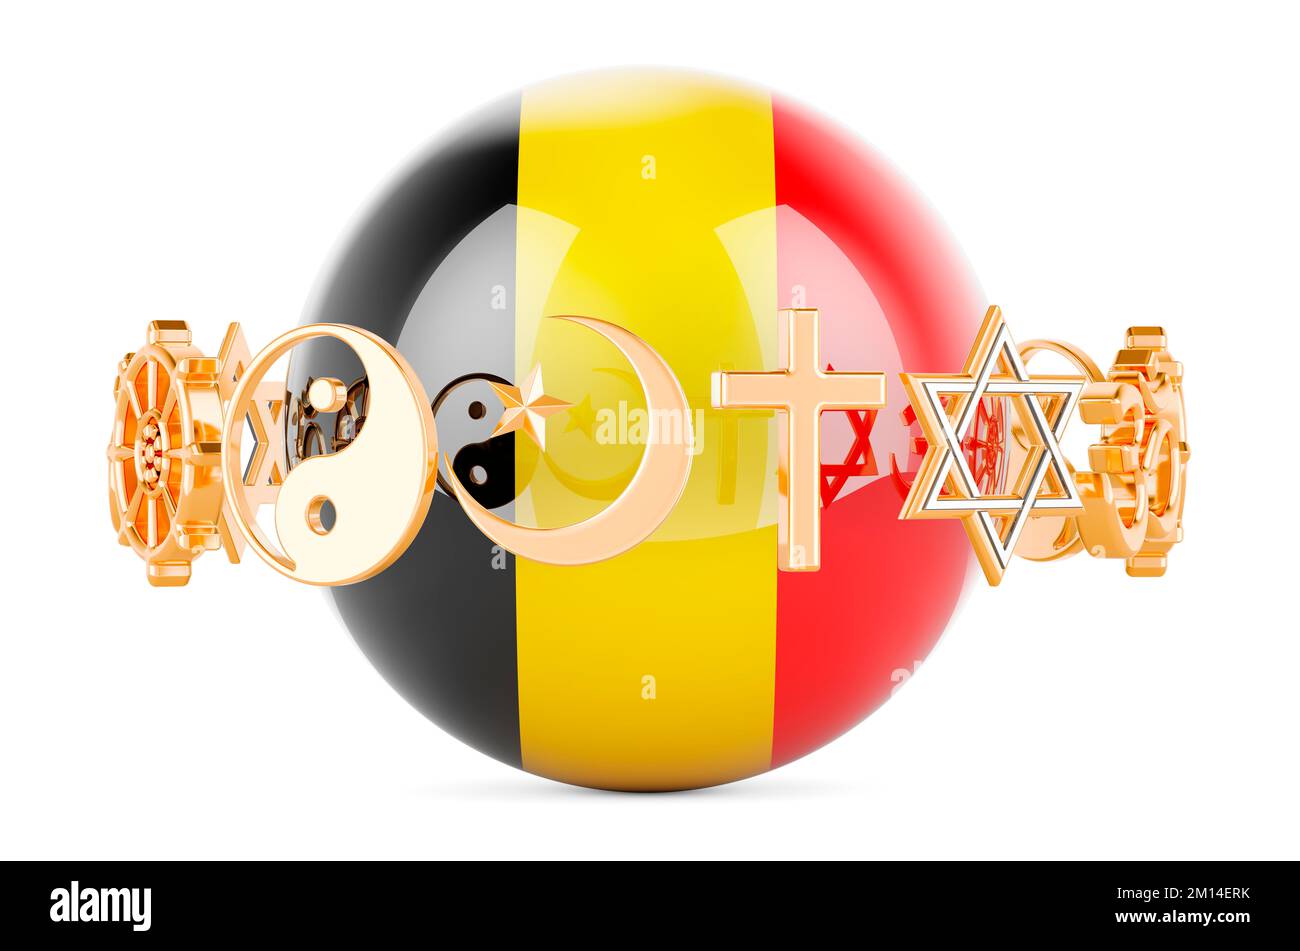 Belgian flag painted on sphere with religions symbols around, 3D rendering isolated on white background Stock Photo